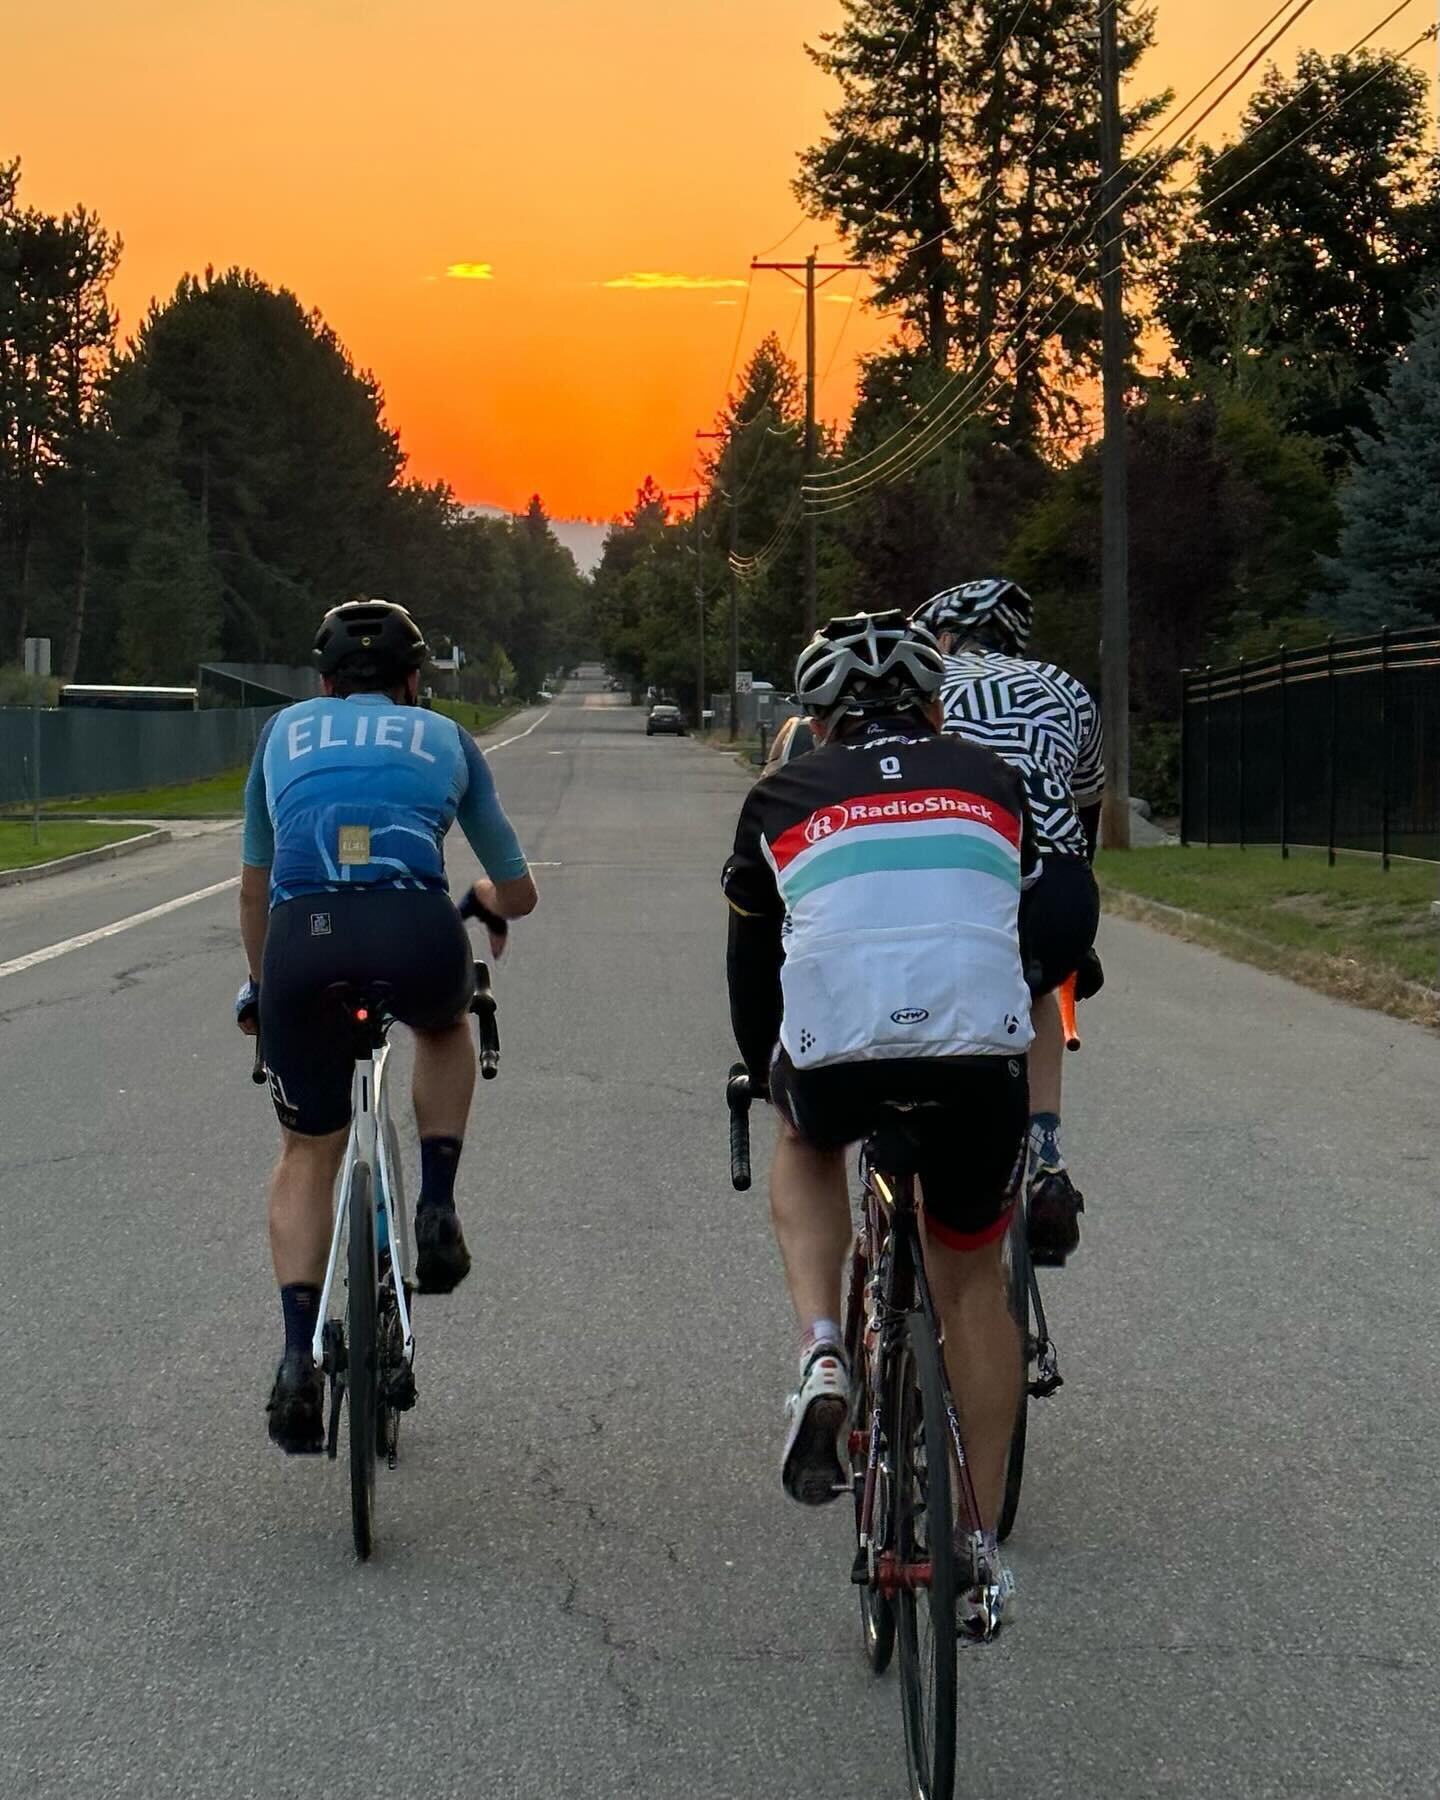 Thursday (9/21) at 5:30pm. The LAST Thursday ride for 2023. 

Friday (9/22) at 7:30am. The LAST coffee ride for 2023. 

Tuesday (9/26) at 5:30pm. The LAST Tuesday ride for 2023. 

We will continue to ride Saturdays until the weather gets poor. ✌️